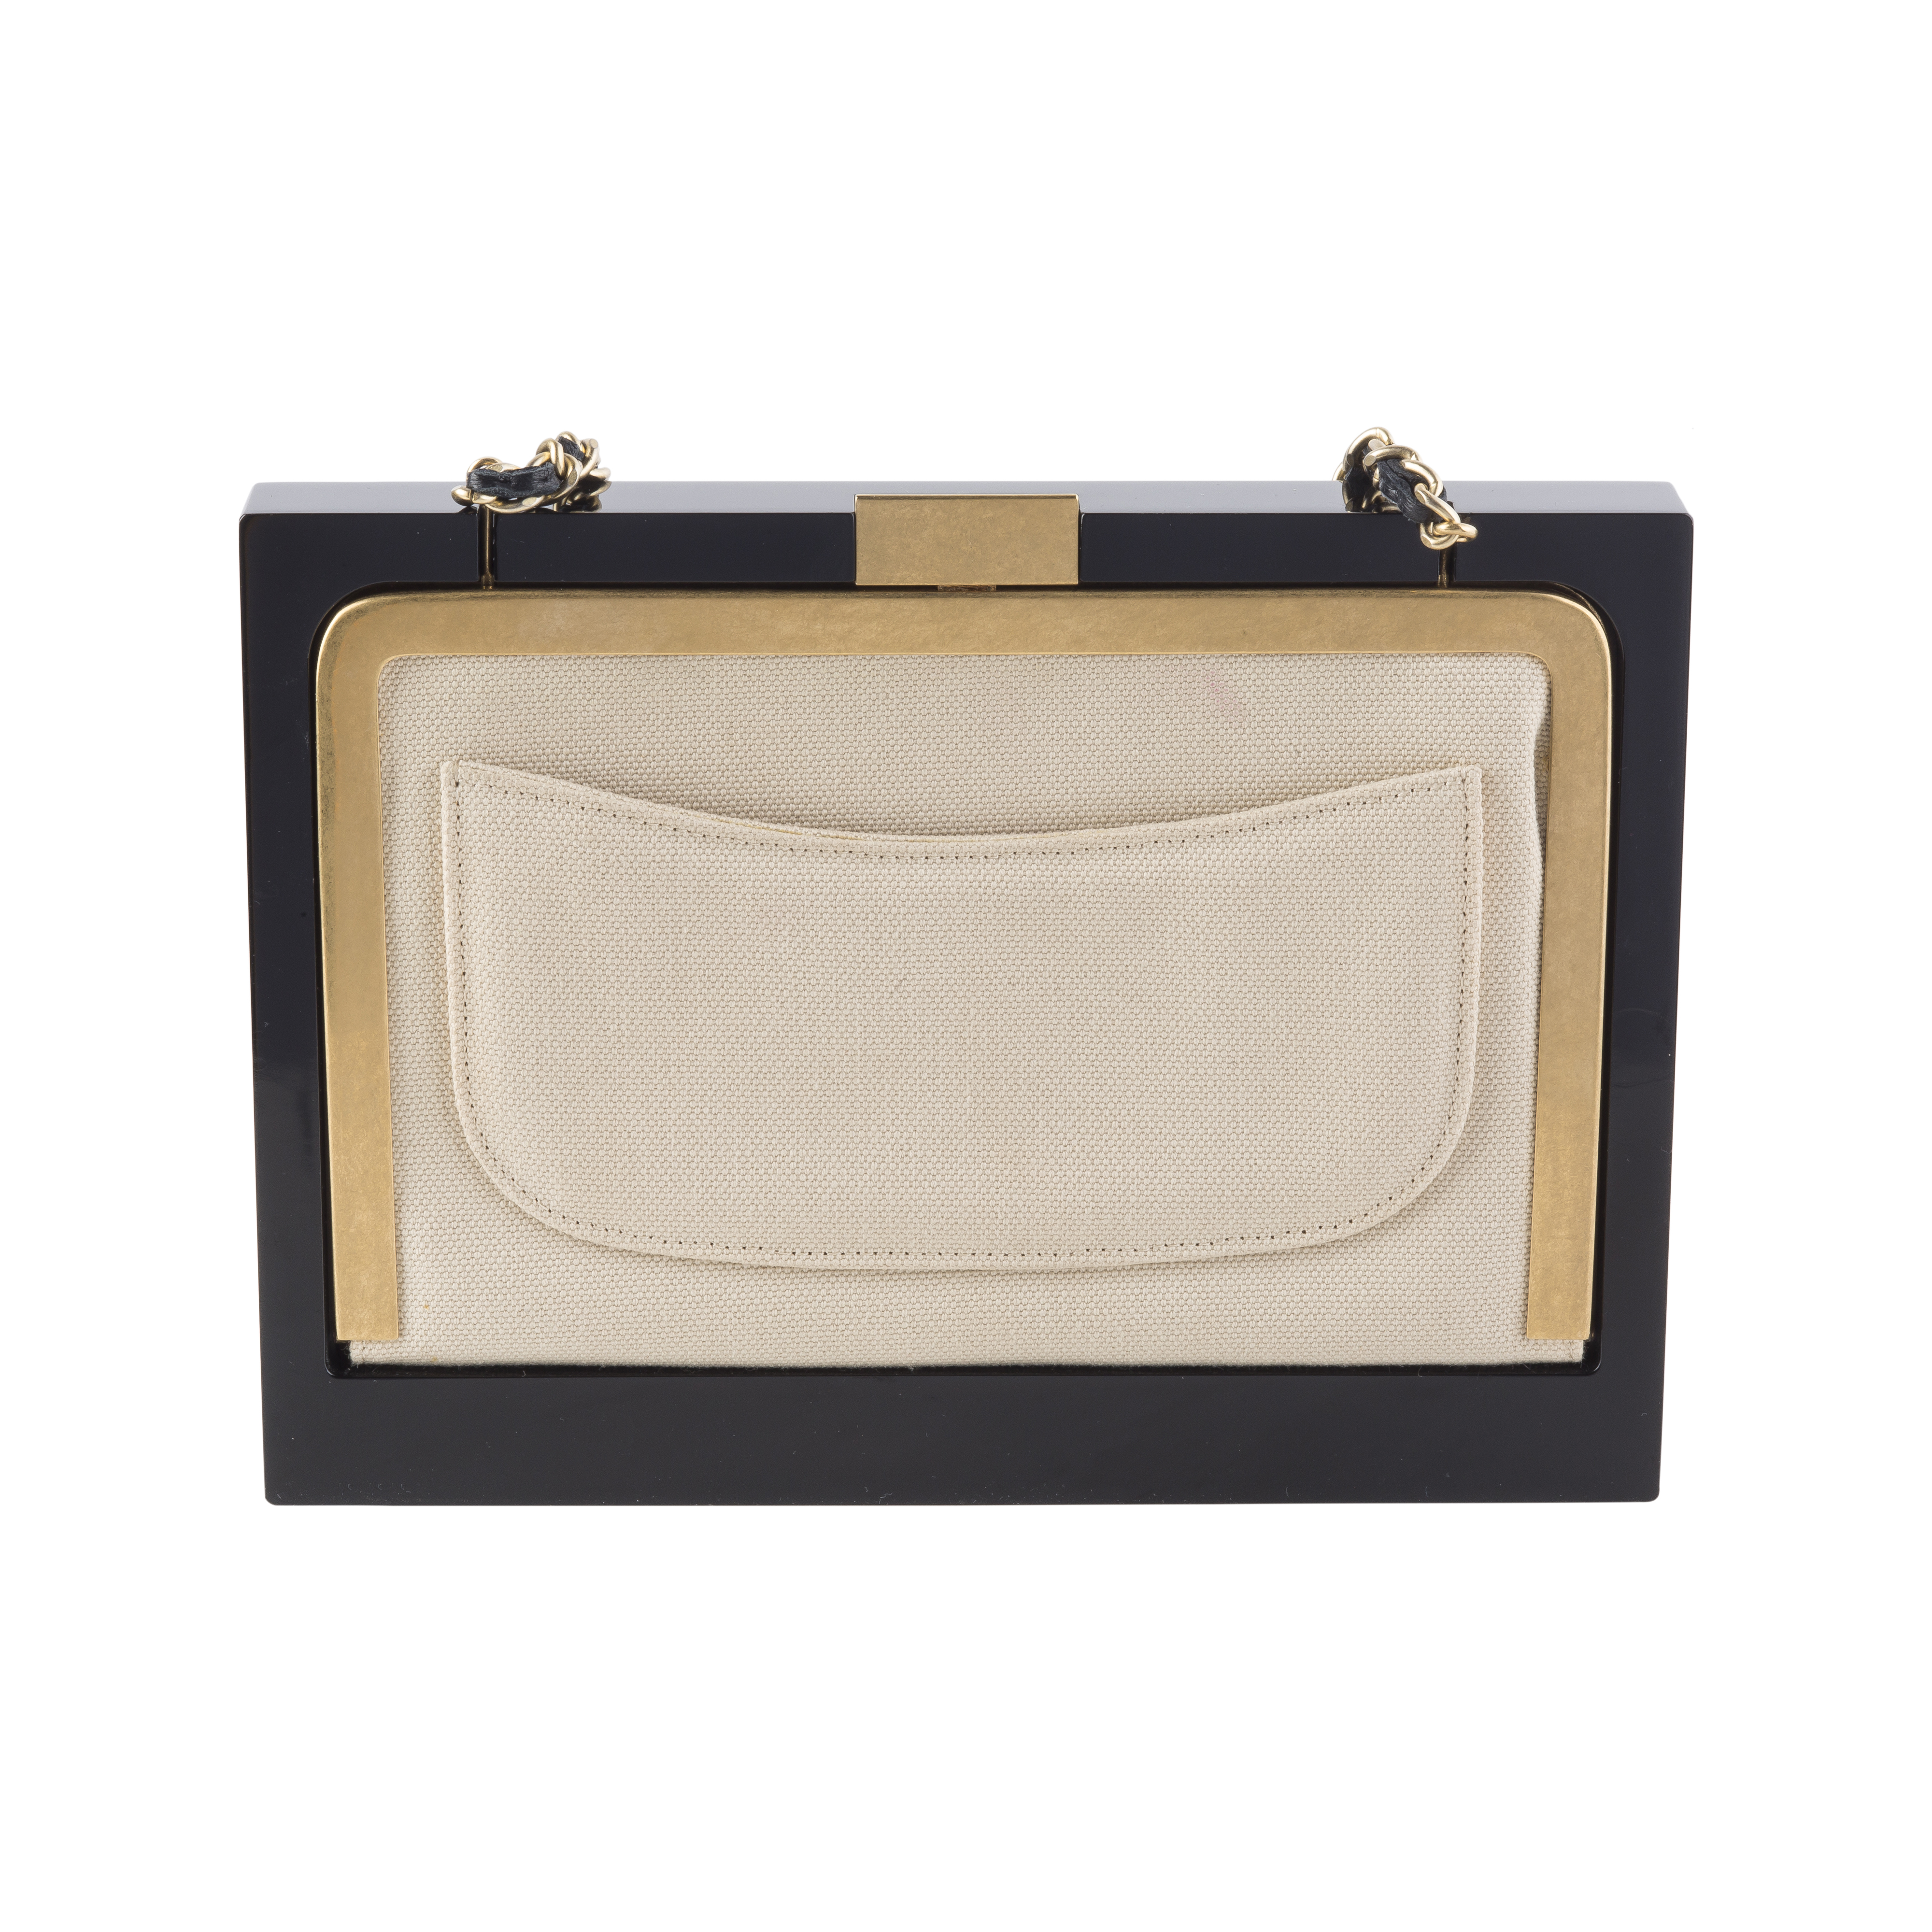 Chanel Flap Bag with Pearl Detail - Janet Mandell